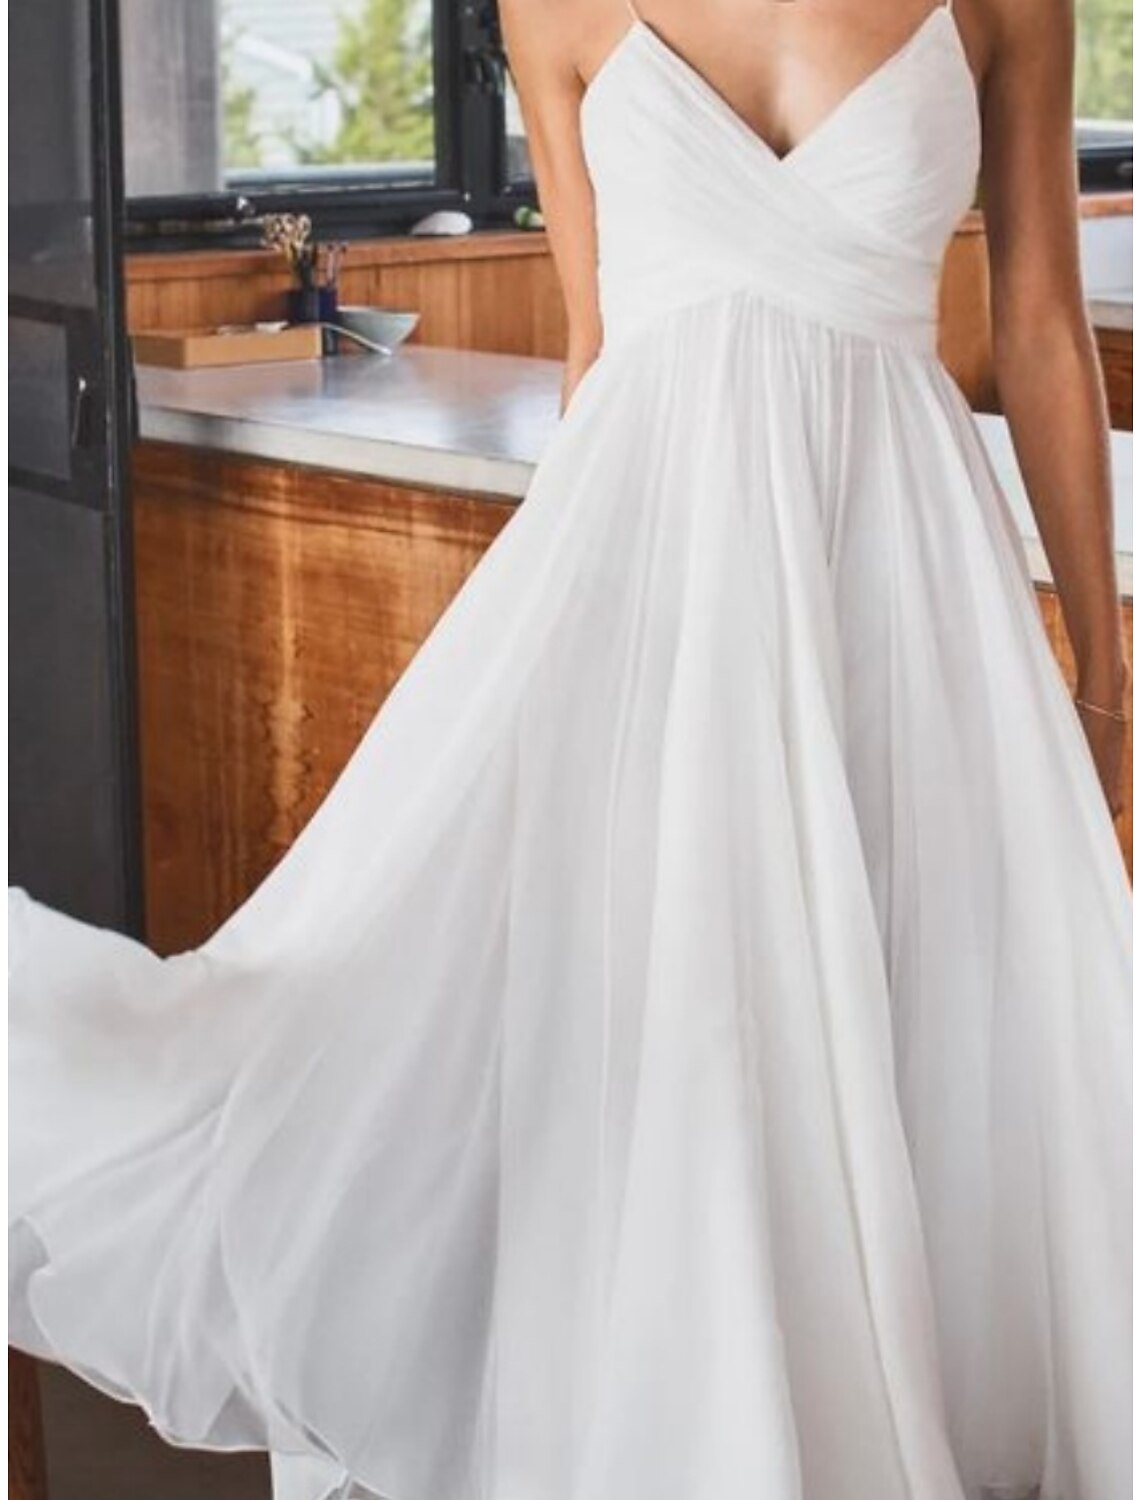 Simple Wedding Dresses Wedding Dresses A-Line V Neck Long Sleeve Tea Length Chiffon Bridal Gowns With Pleats Solid Color